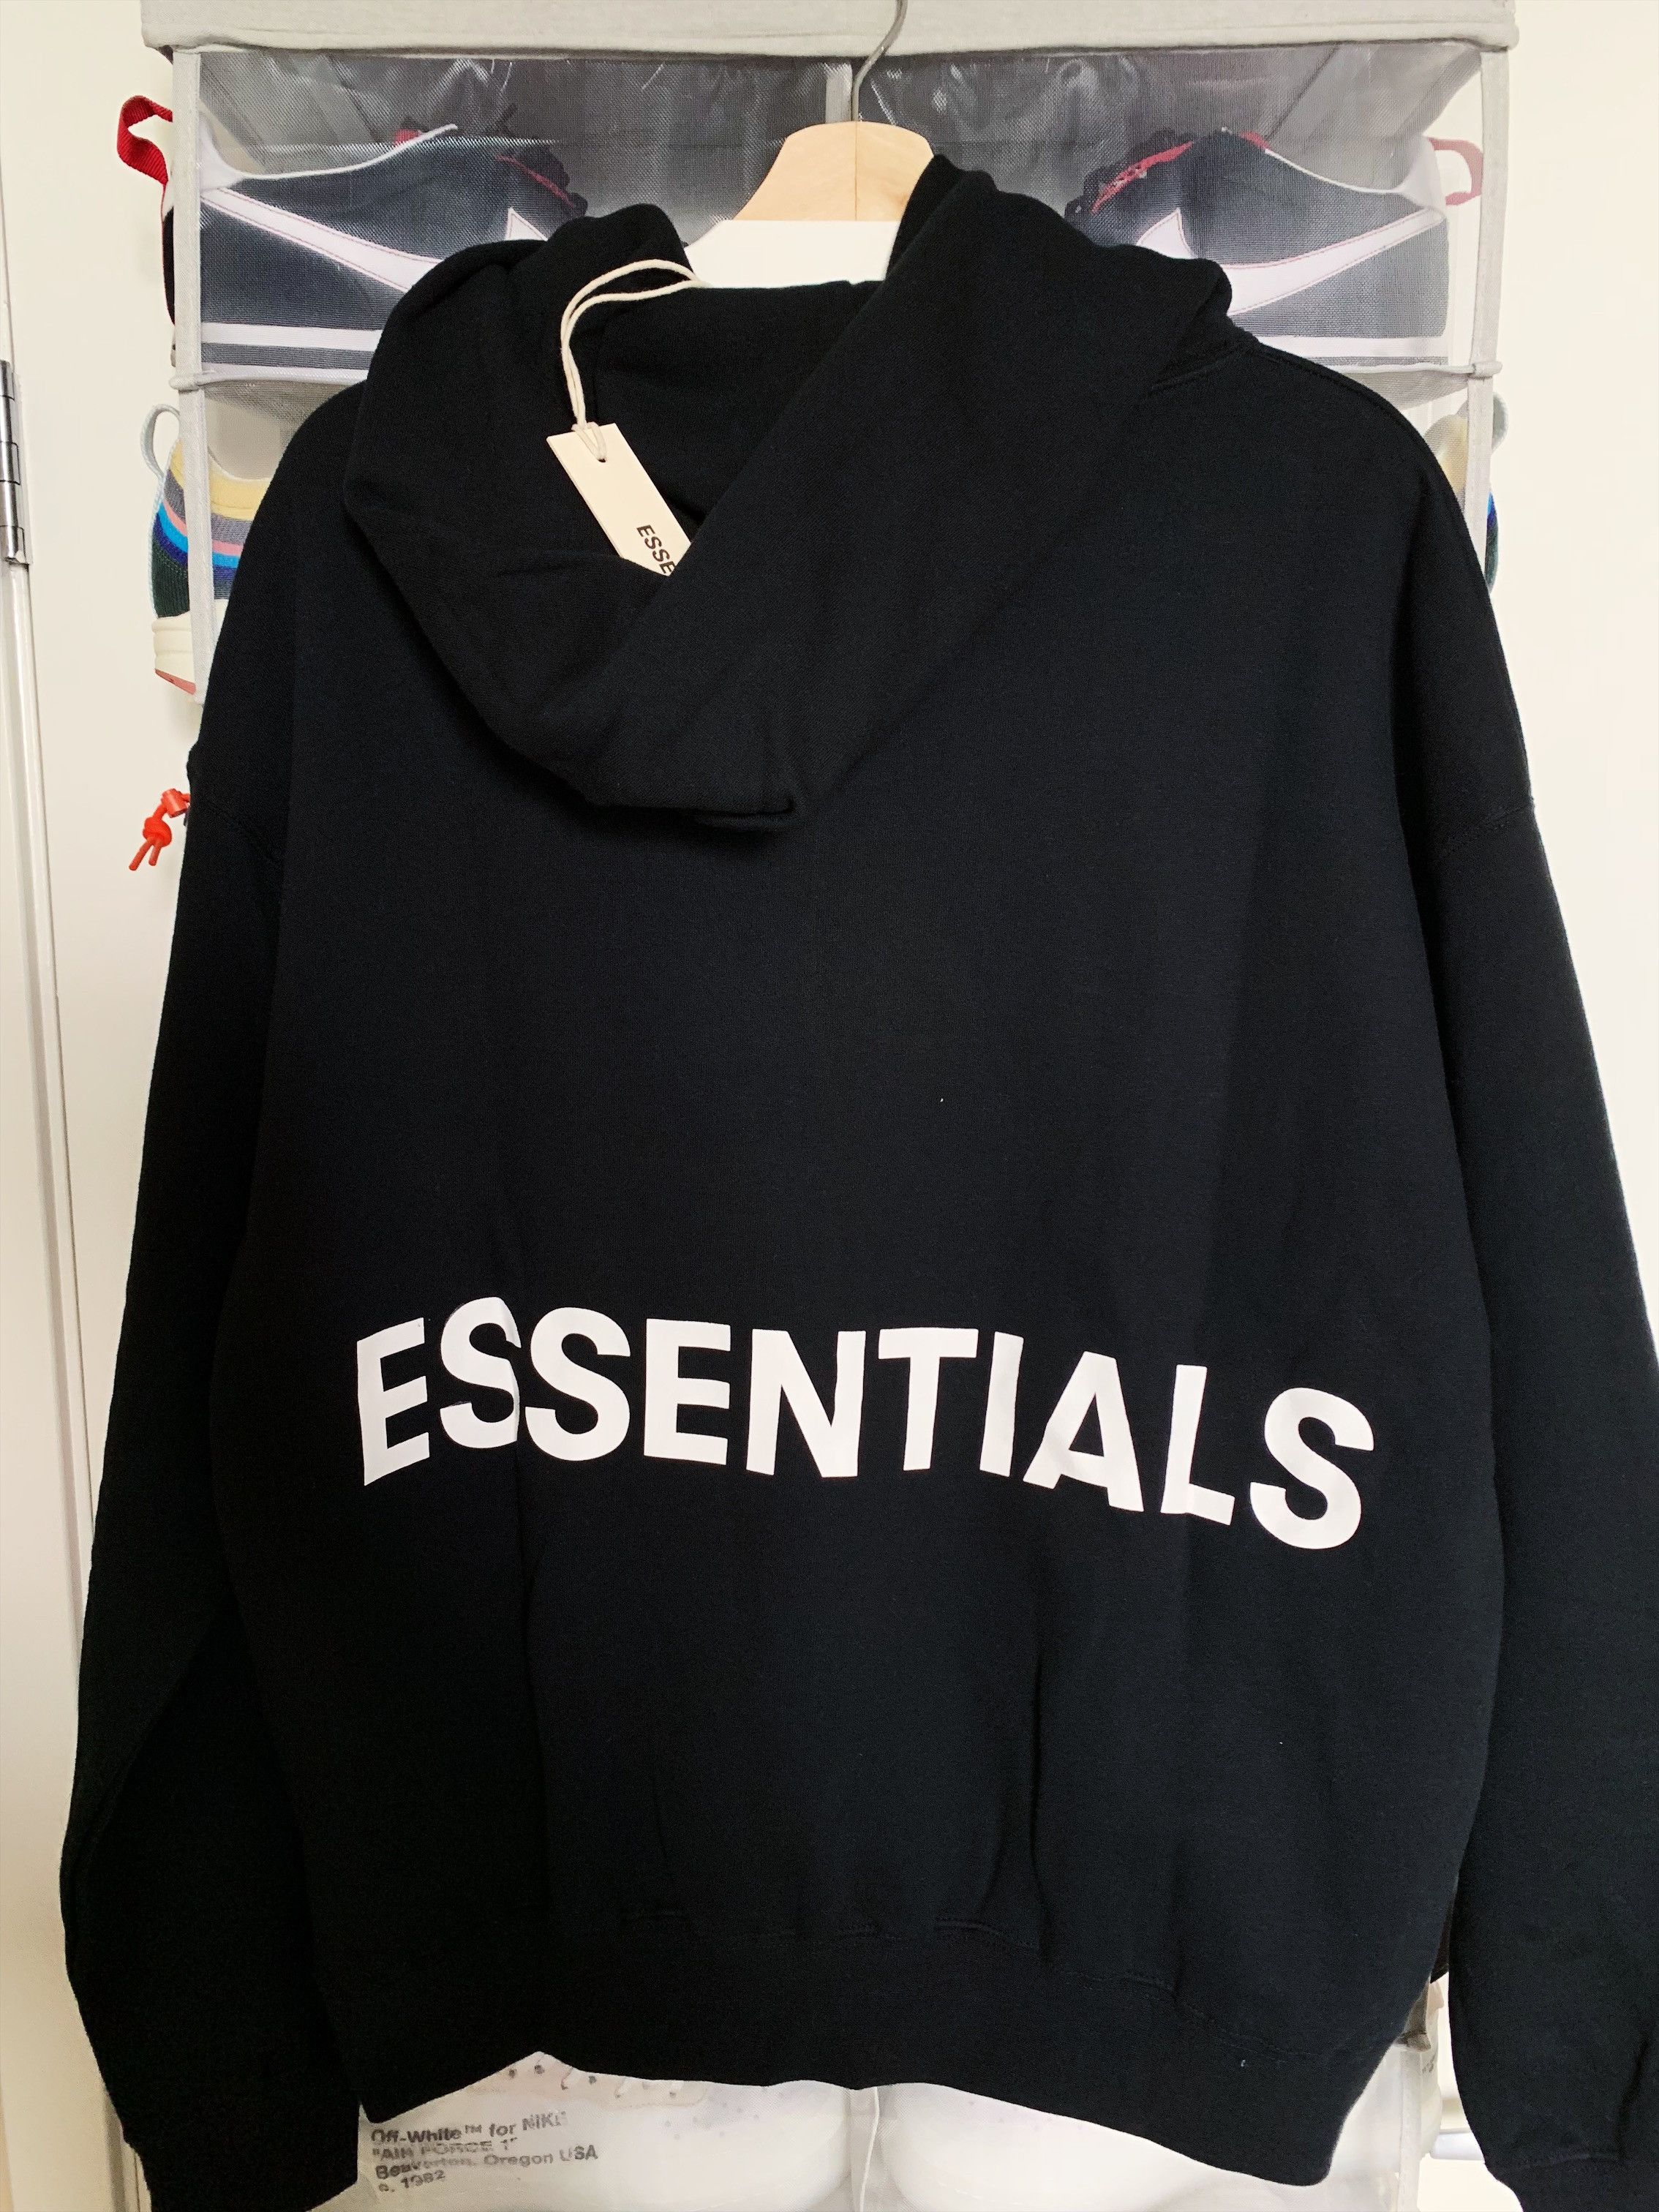 FOG Fear of God Essentials Graphic Pullover Hoodie Black | Grailed